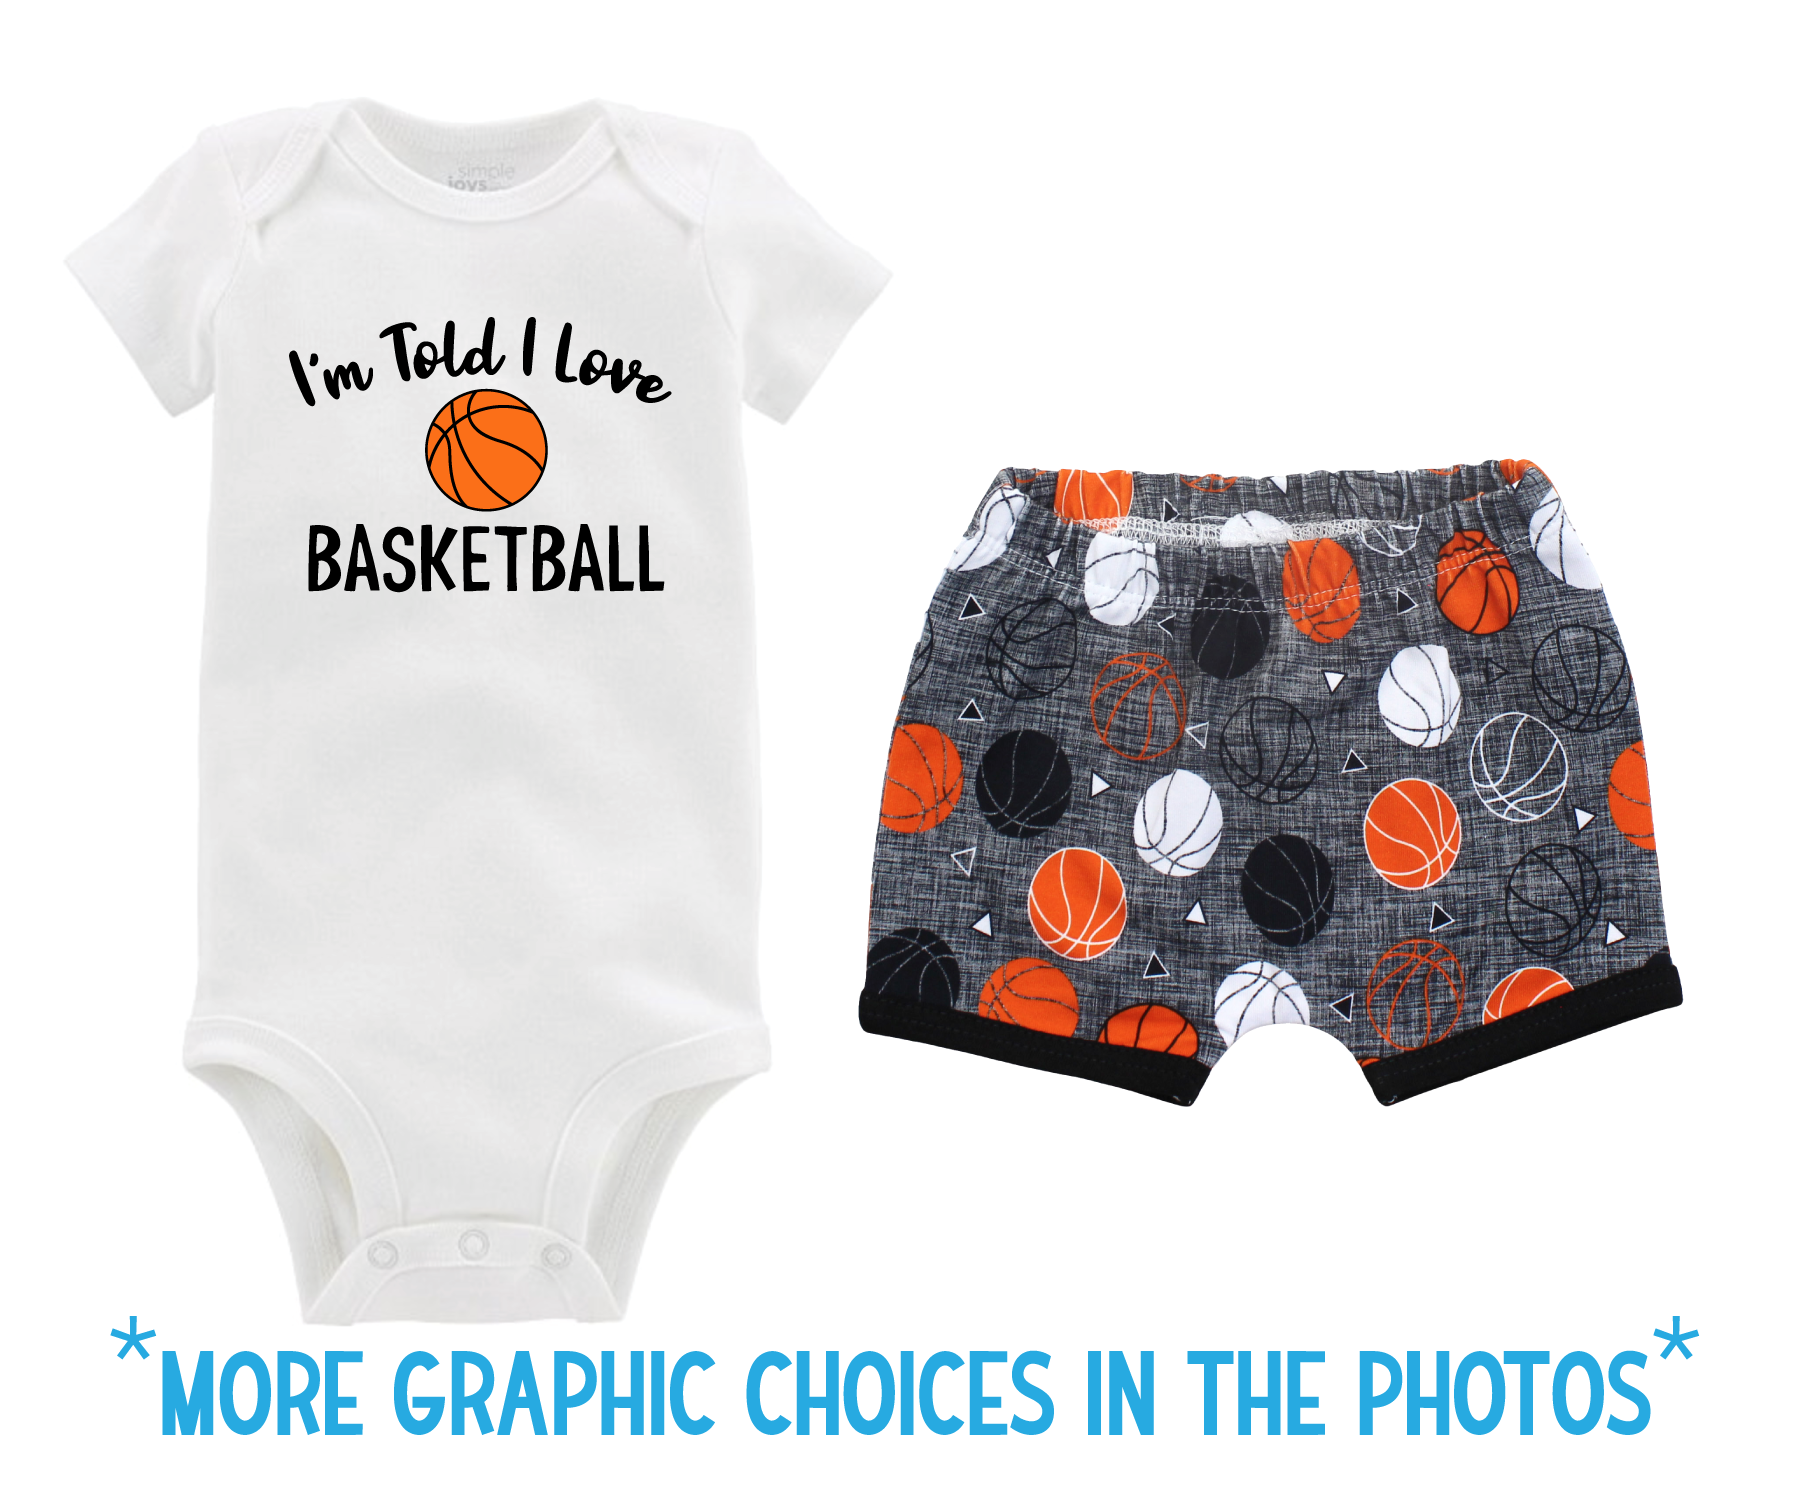 Unisex Basketball Short Outfit